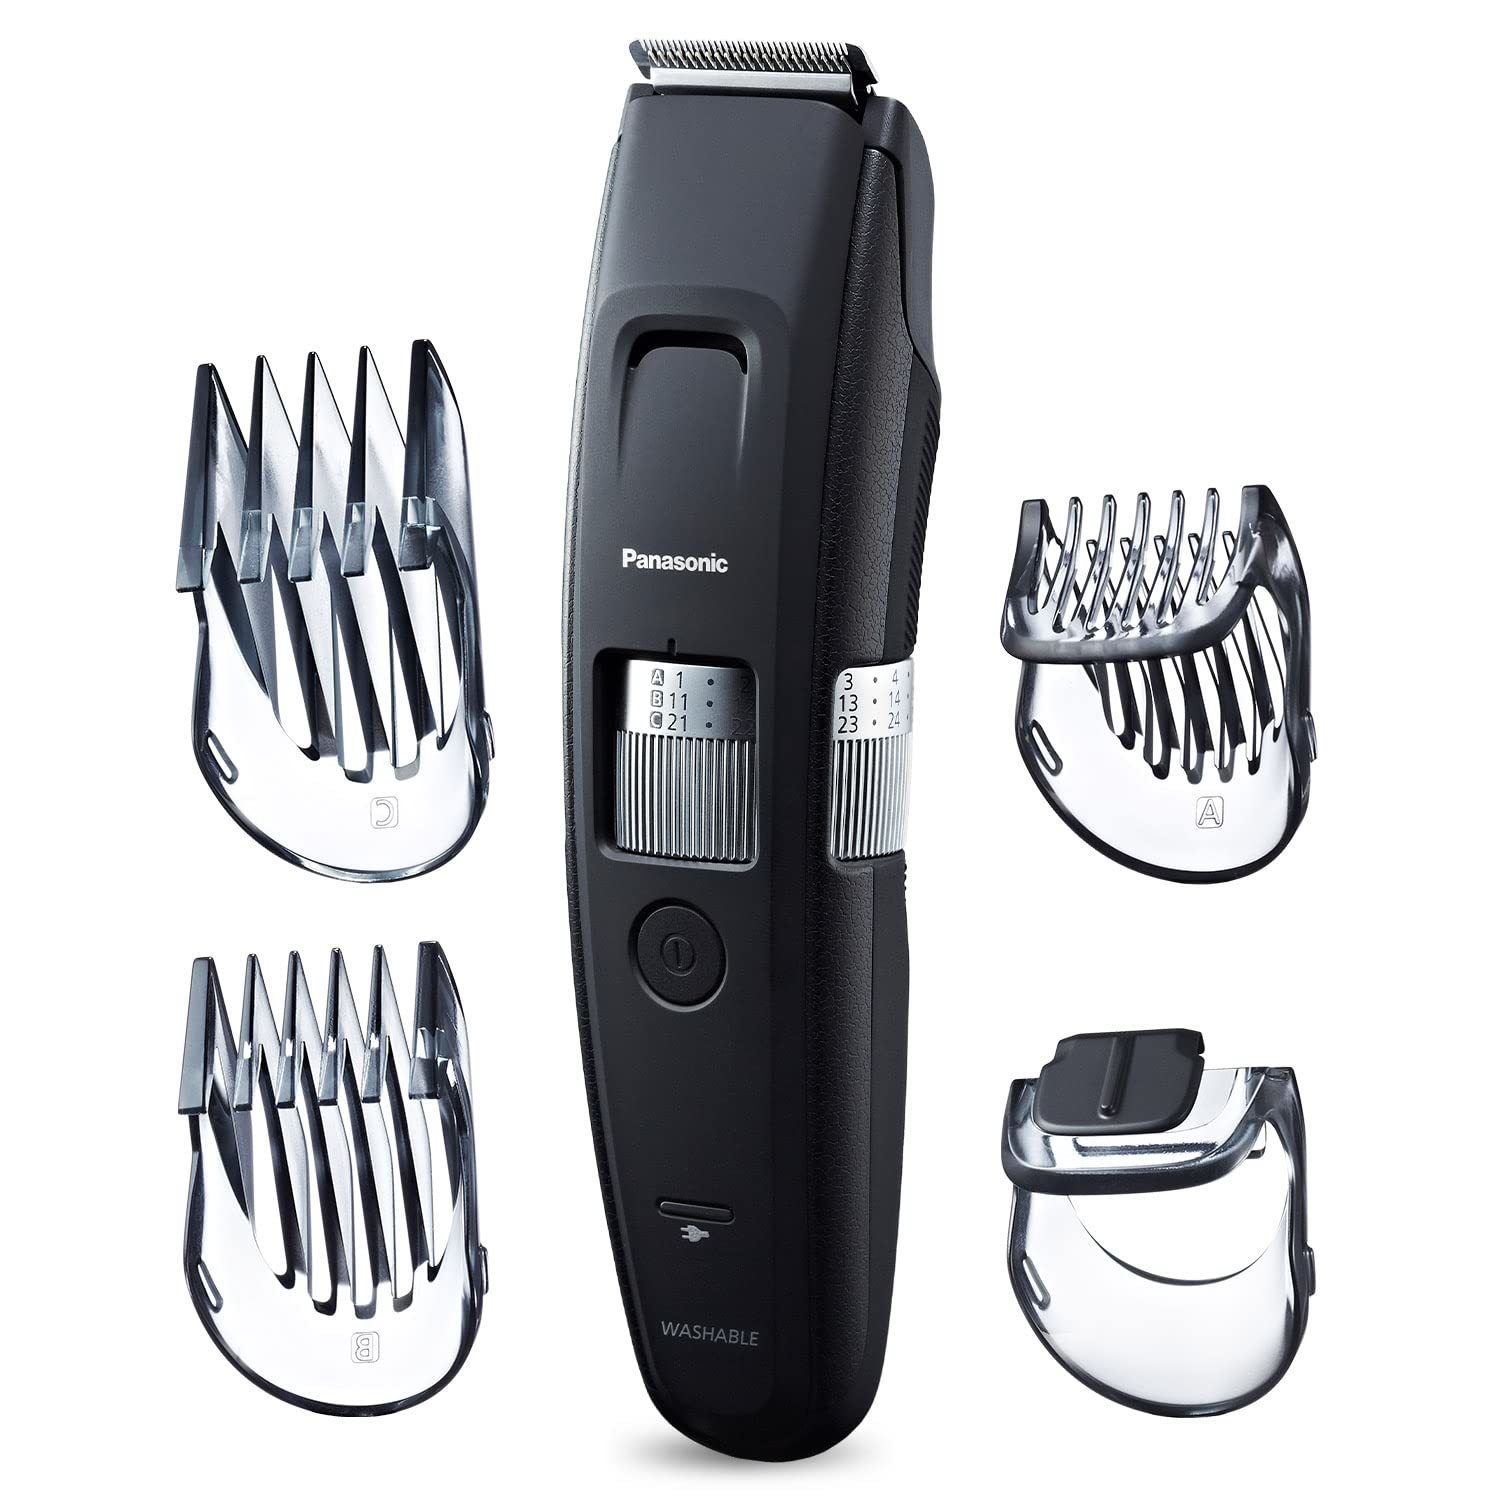 Panasonic Long Beard Trimmer for Men, 58 Length Settings and 4 Attachments for - $97.99